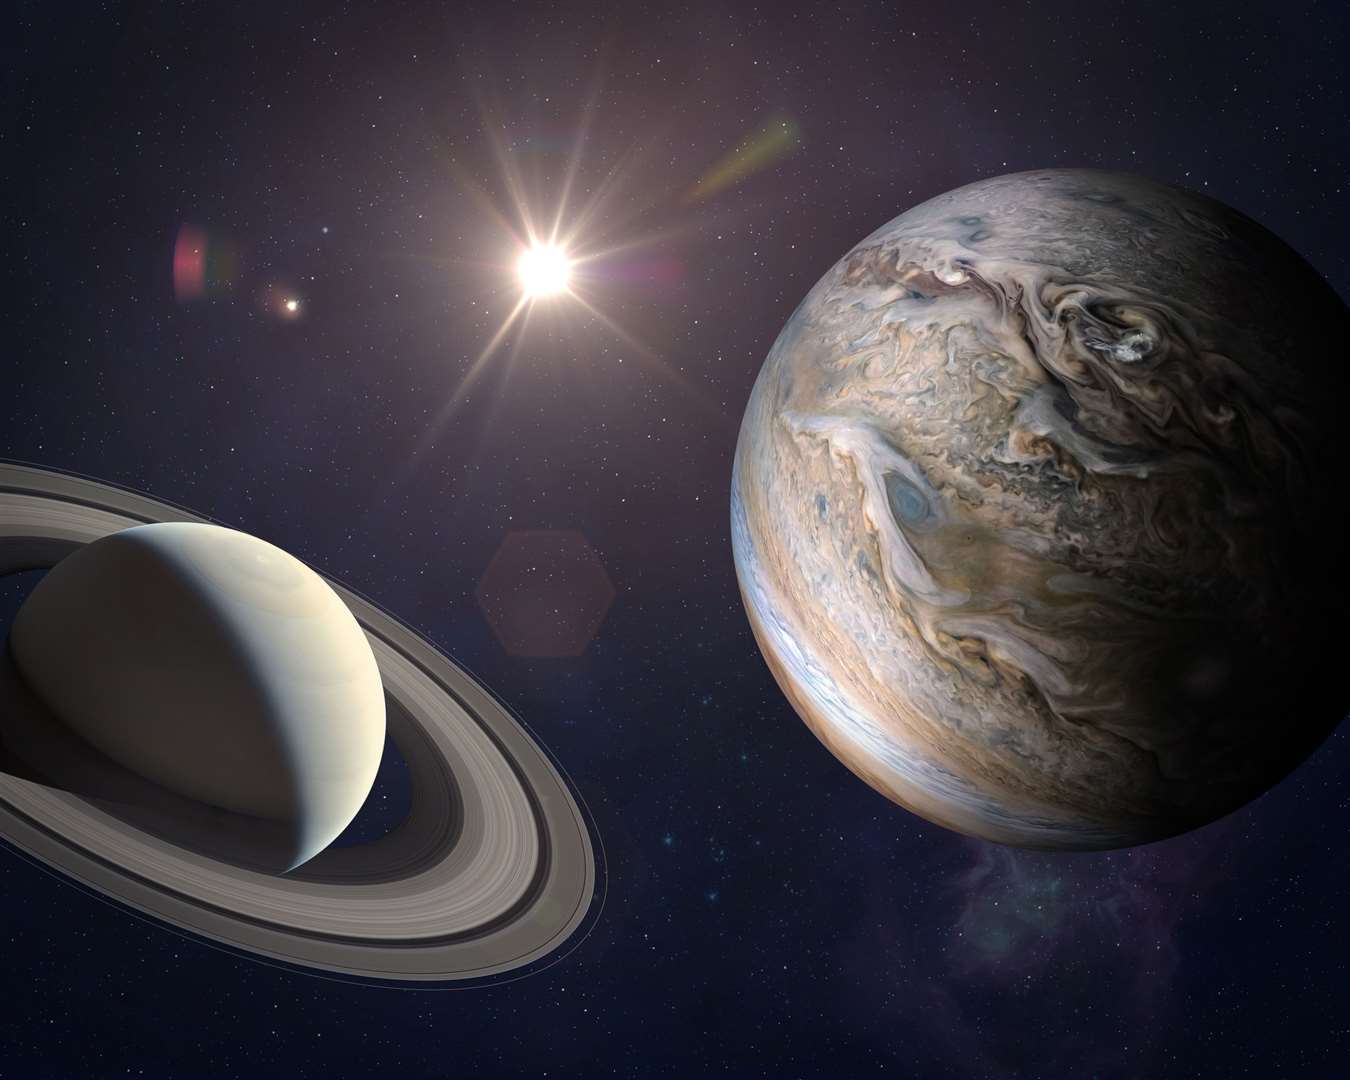 Five planets could be seen together this week. Image: Adobe stock image.